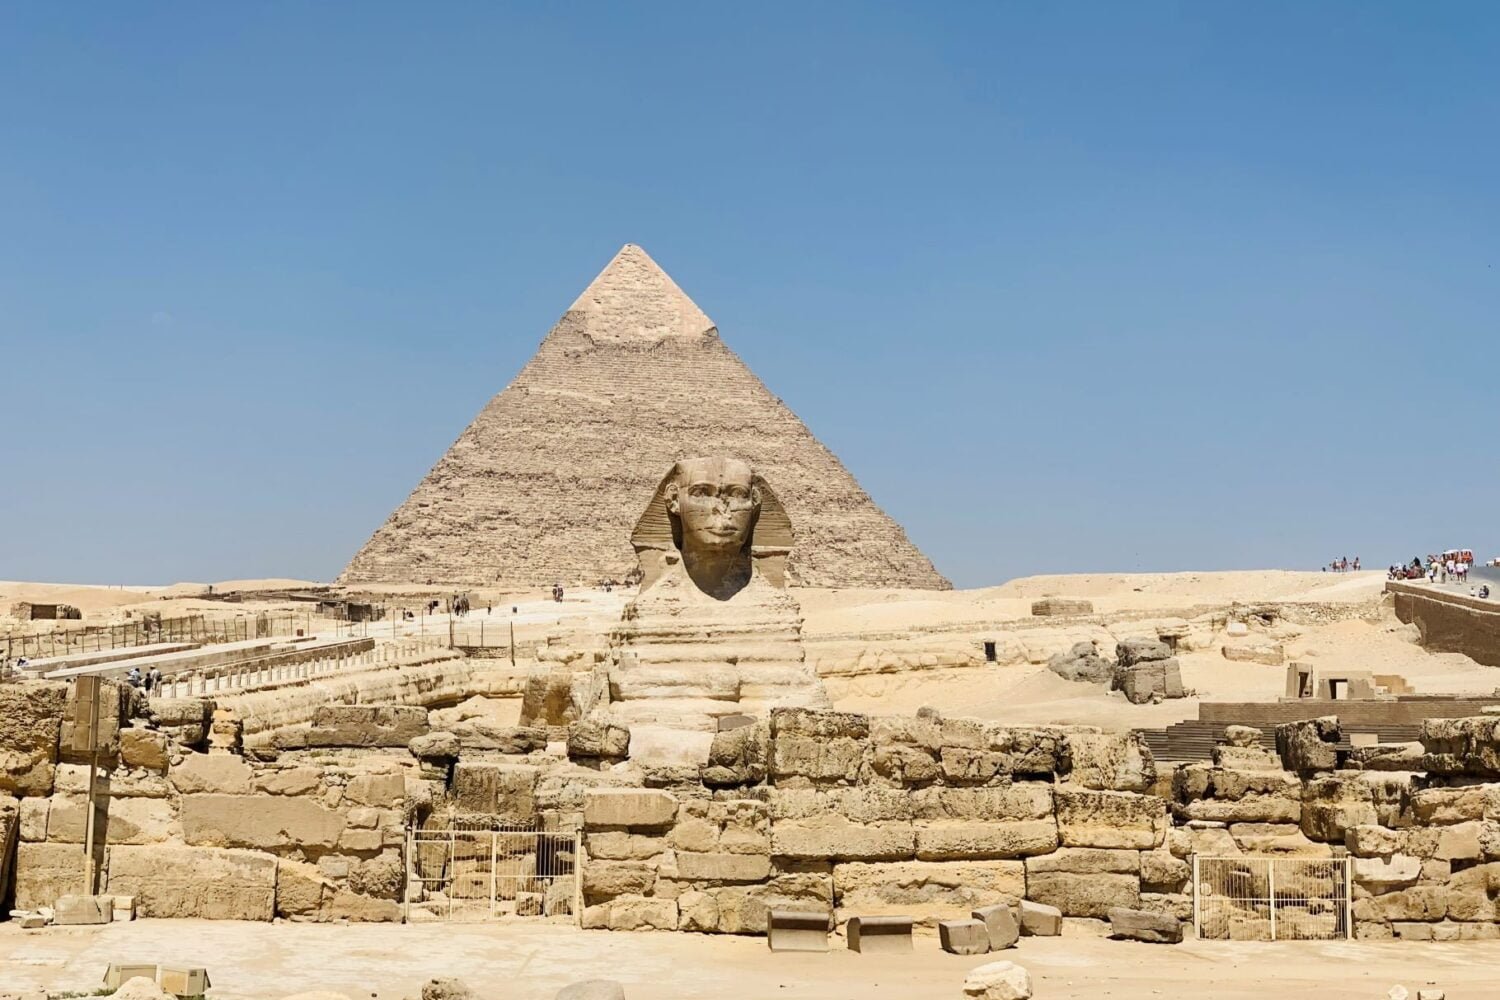 6-Days Cairo & Nile River Cruise From USA